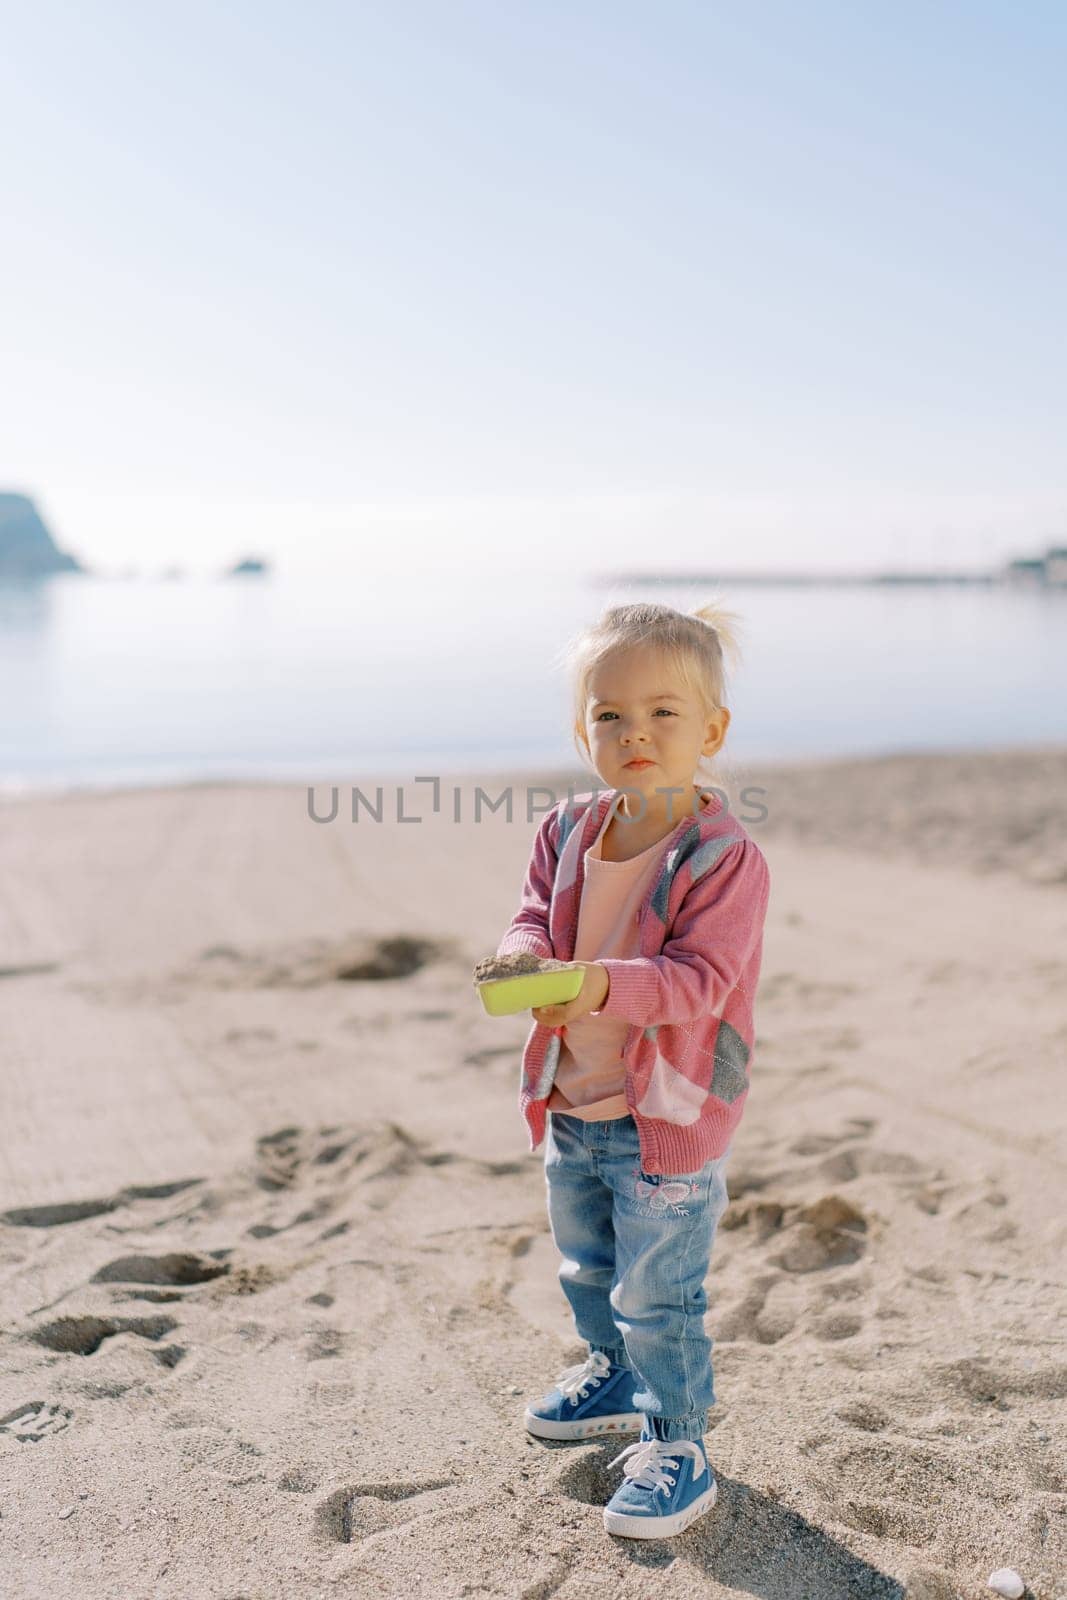 Little girl stands on the beach with a toy shovel full of sand by Nadtochiy